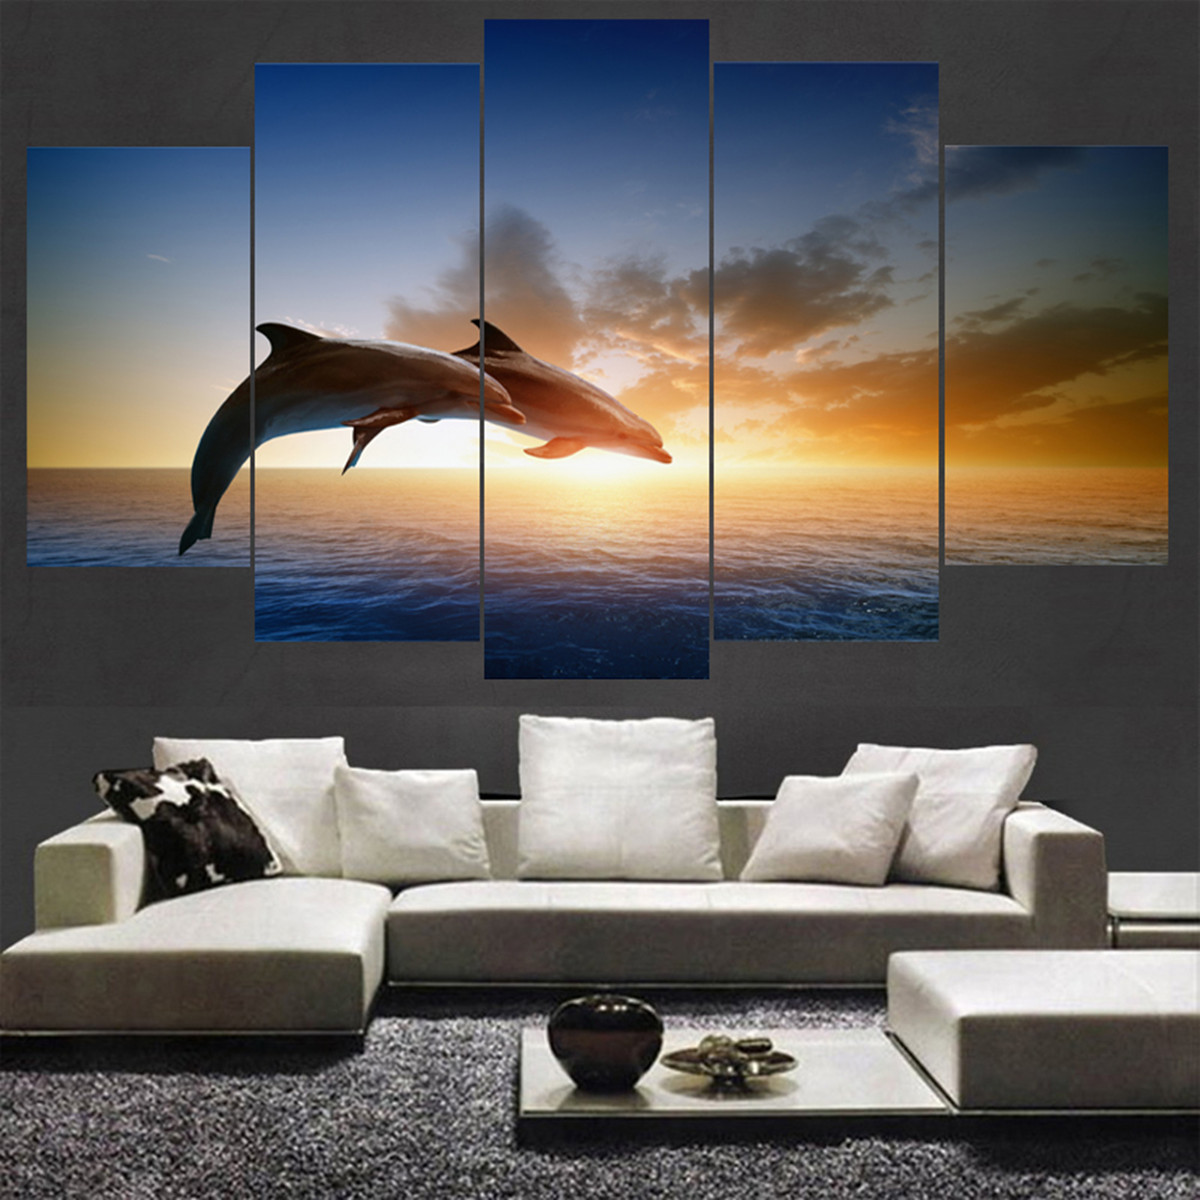 Dolphin-Sunset-Canvas-Print-Paintings-Poster-Wall-Art-Picture-Home-Decor-Unframed-1638931-4